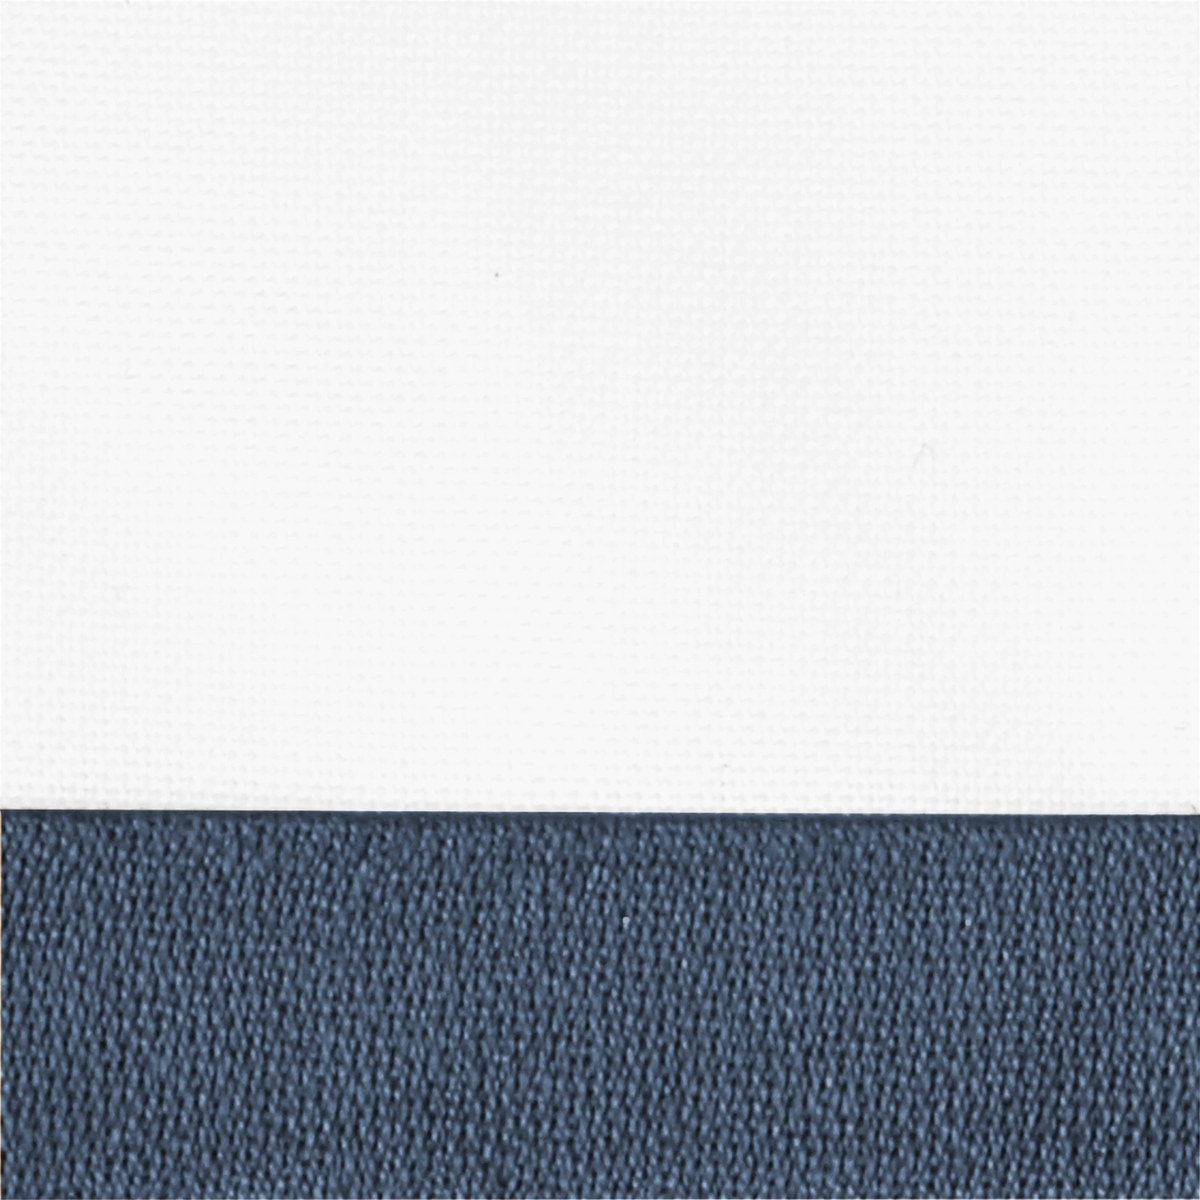 Swatch Sample of Matouk Gatsby Bedding Collection Steel Blue Color